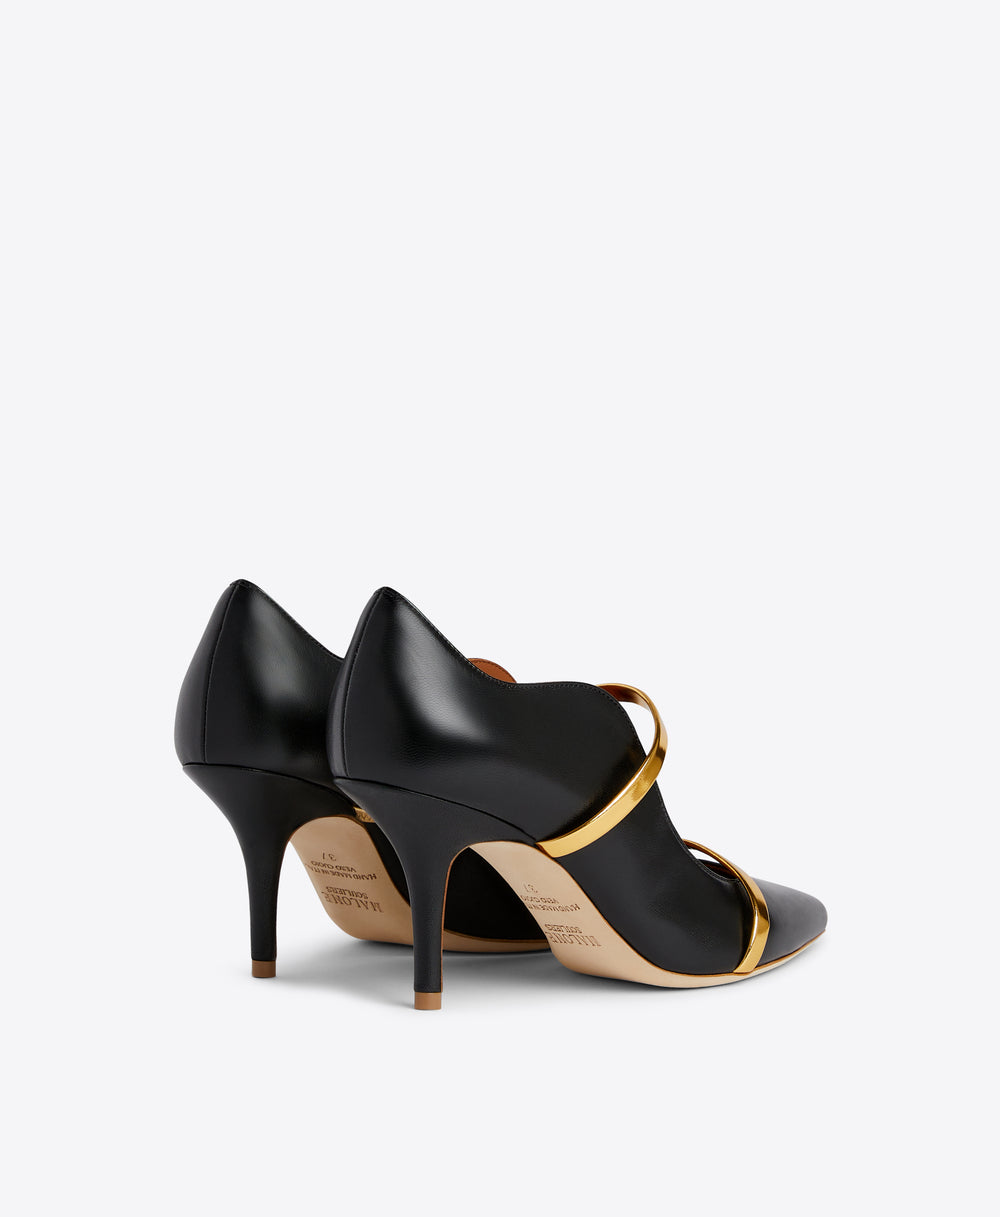 Malone Souliers Maureen 70 Black and Gold Leather Heeled Pumps